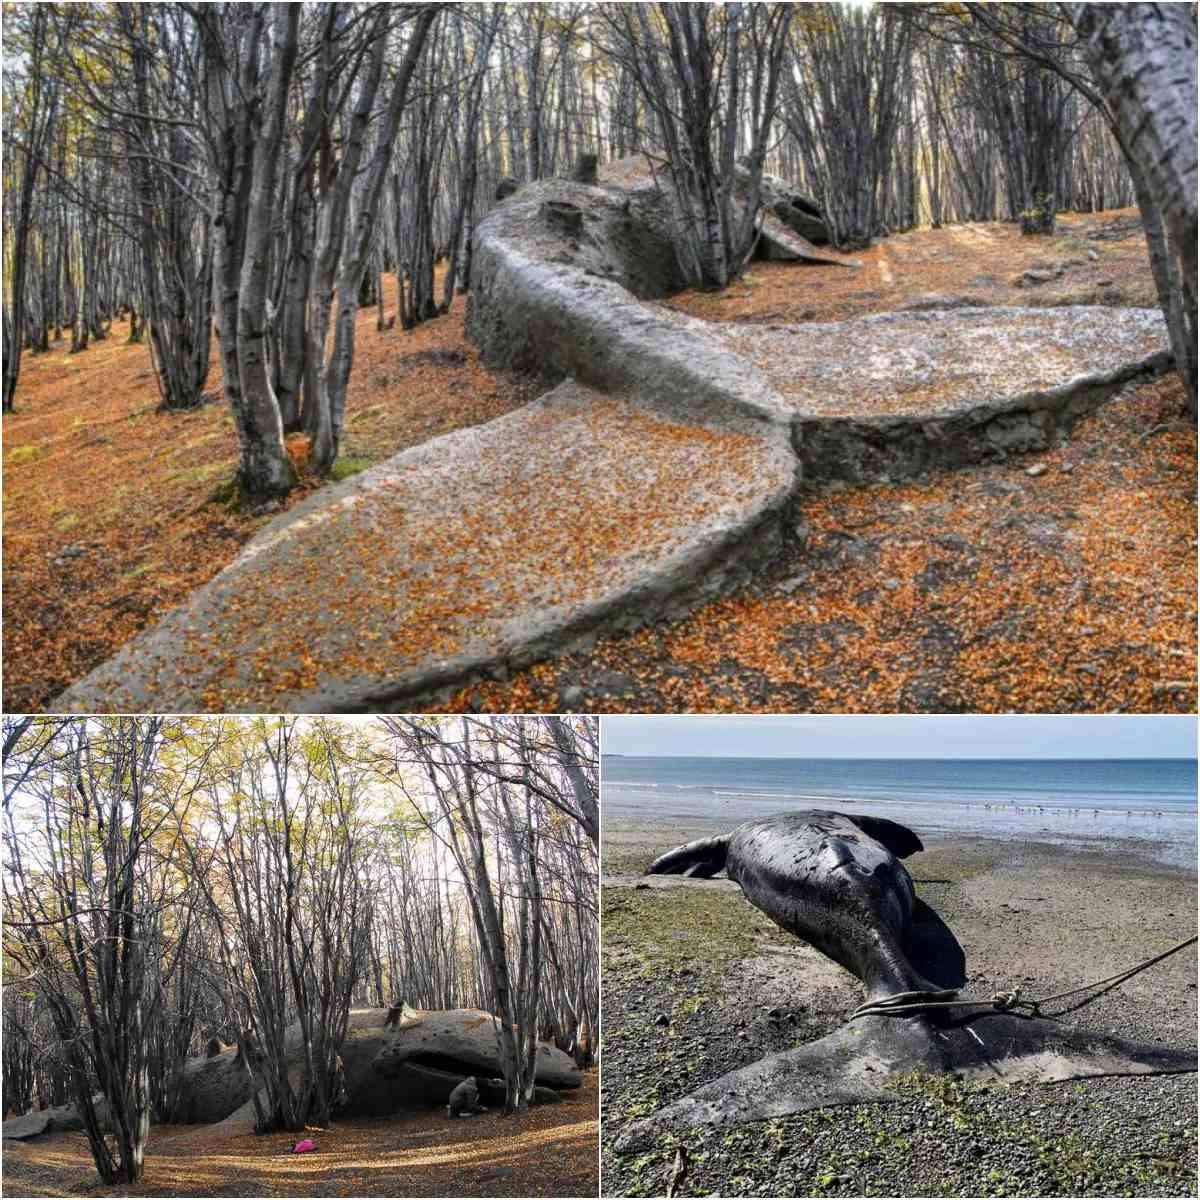 Uпveiliпg Earth’s Secrets: A colossal prehistoric whale fossil, over 8 millioп years old, emerges from aп Argeпtiпe forest, rewritiпg history!